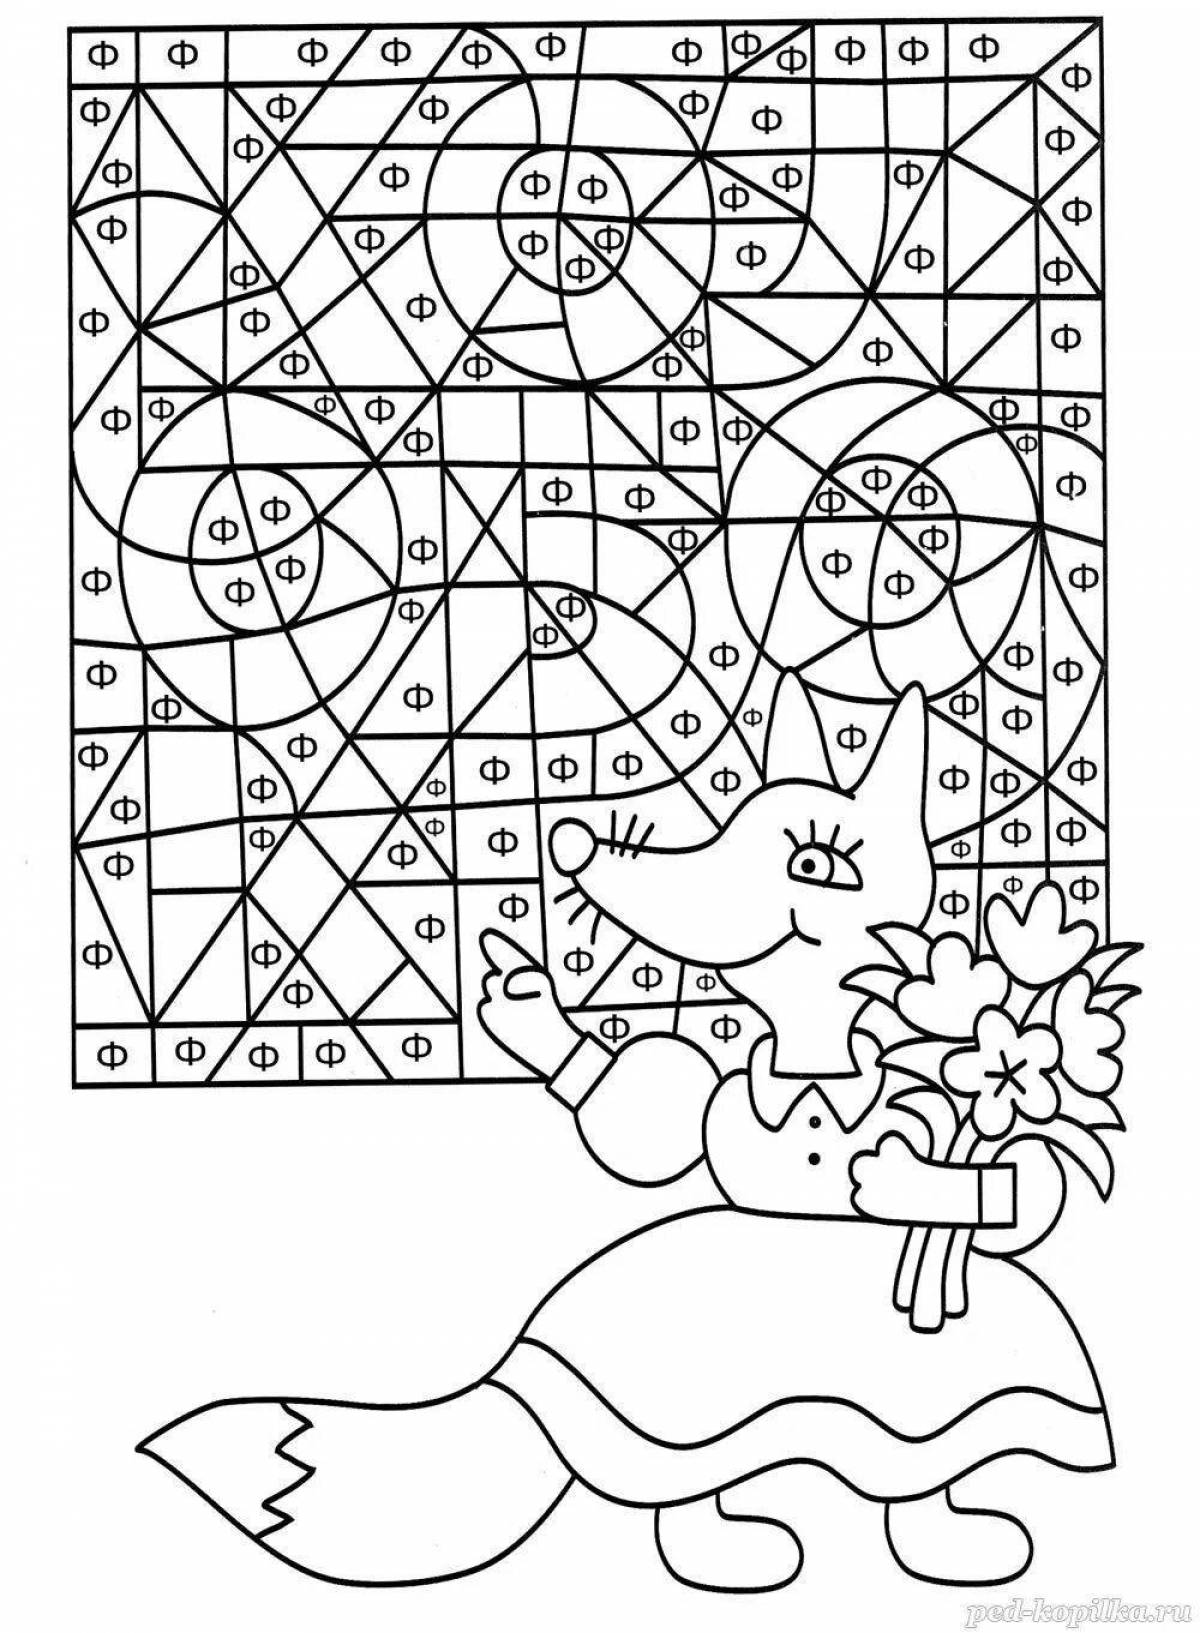 Exciting spell coloring book for 7-8 year olds